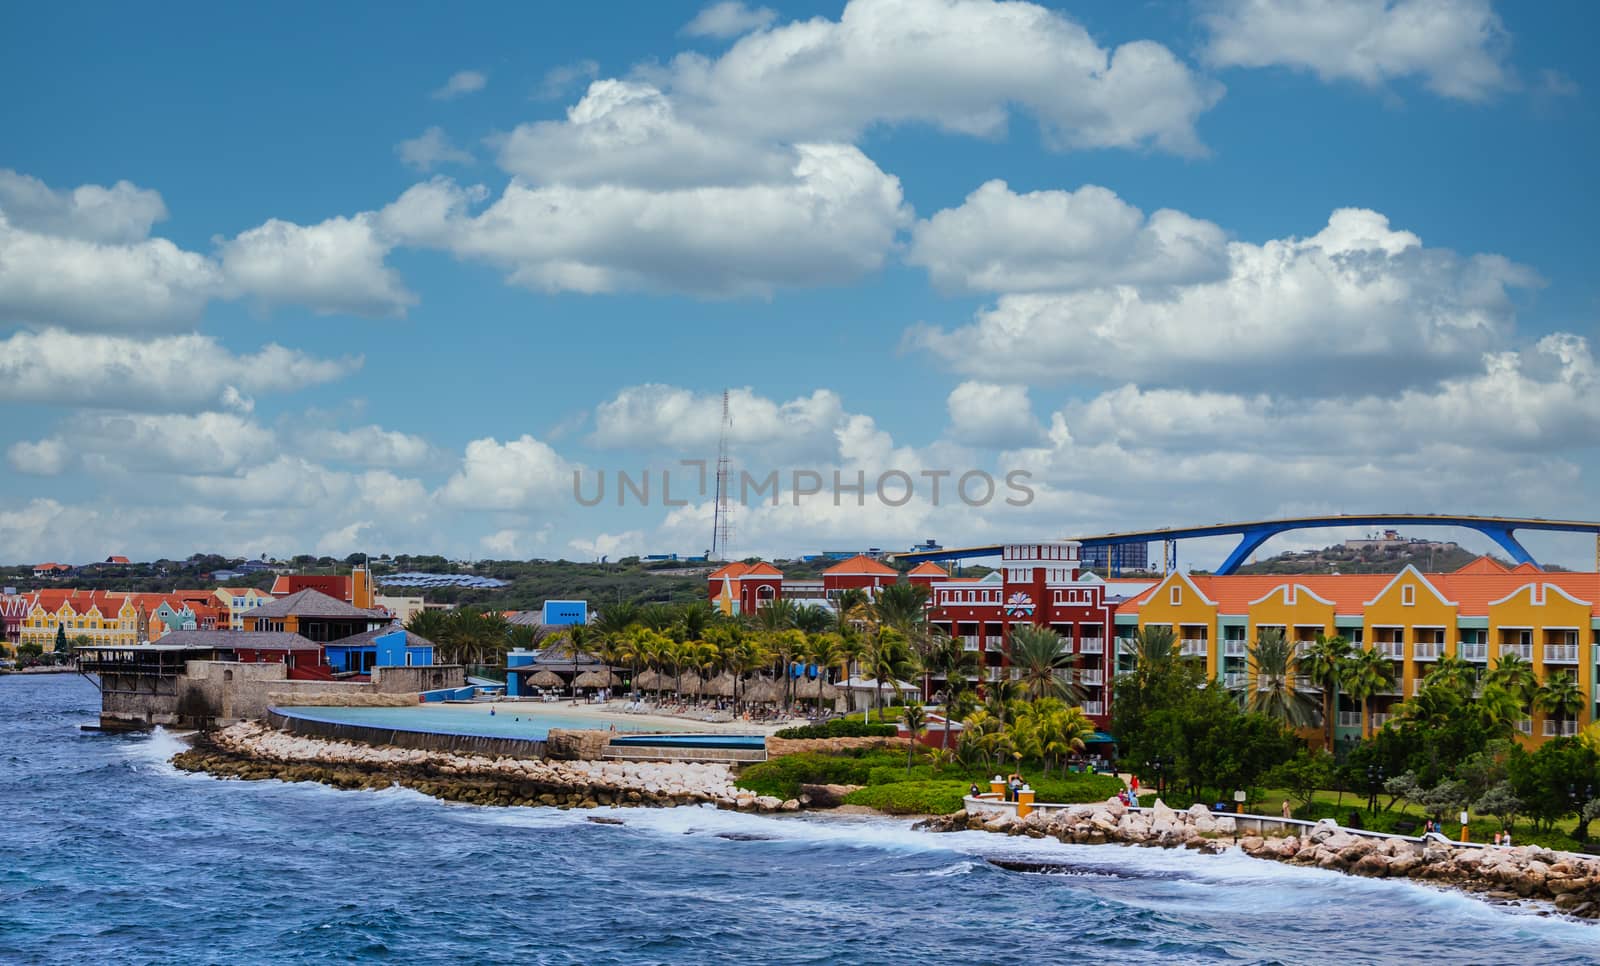 Shopping and Resort On Coast of Curacao by dbvirago